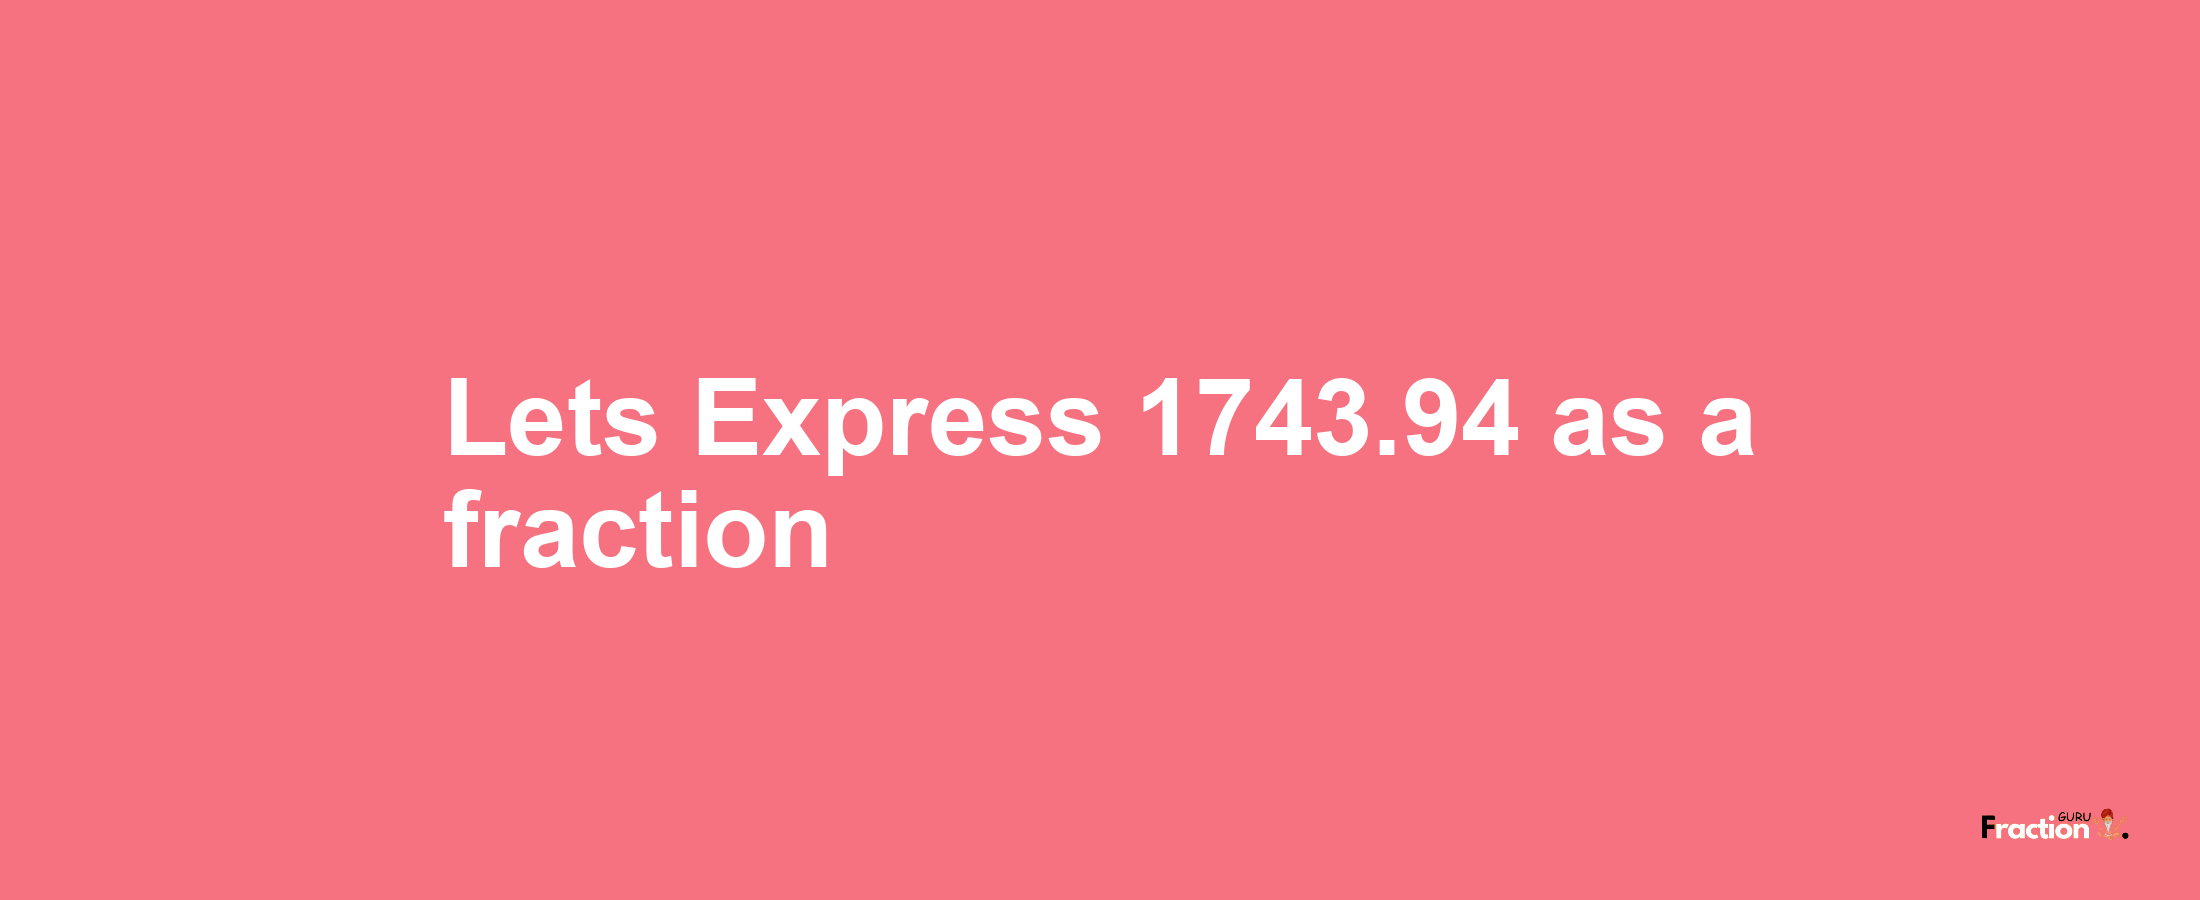 Lets Express 1743.94 as afraction